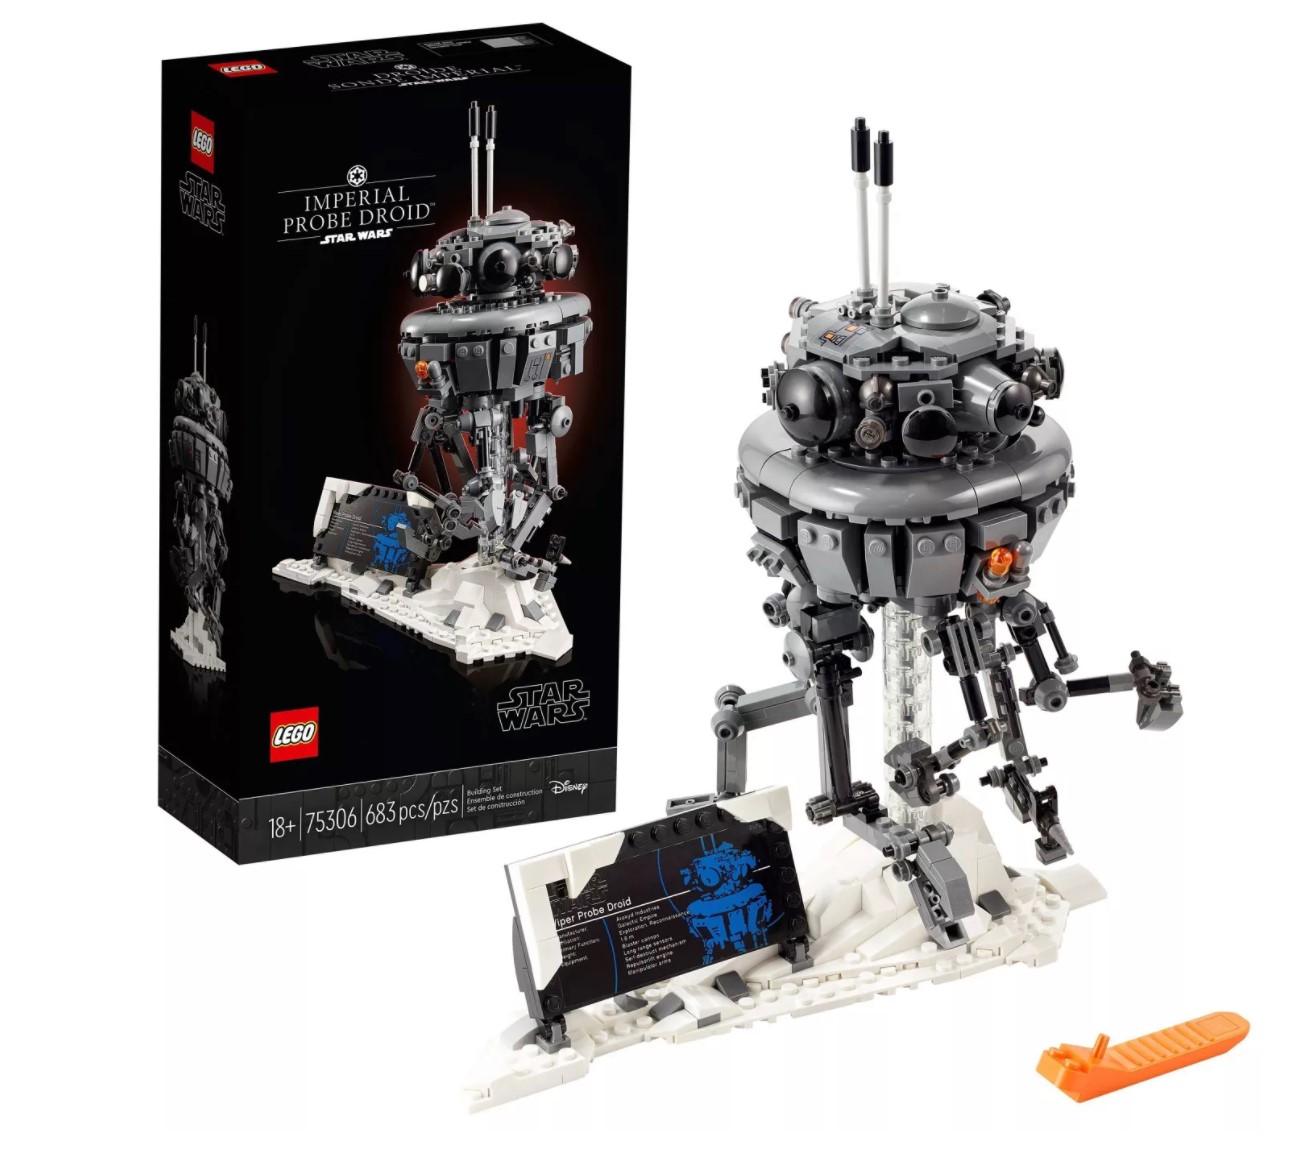 This Lego Star Wars deal gets you the rare, retiring Imperial Probe Droid for its lowest ever price